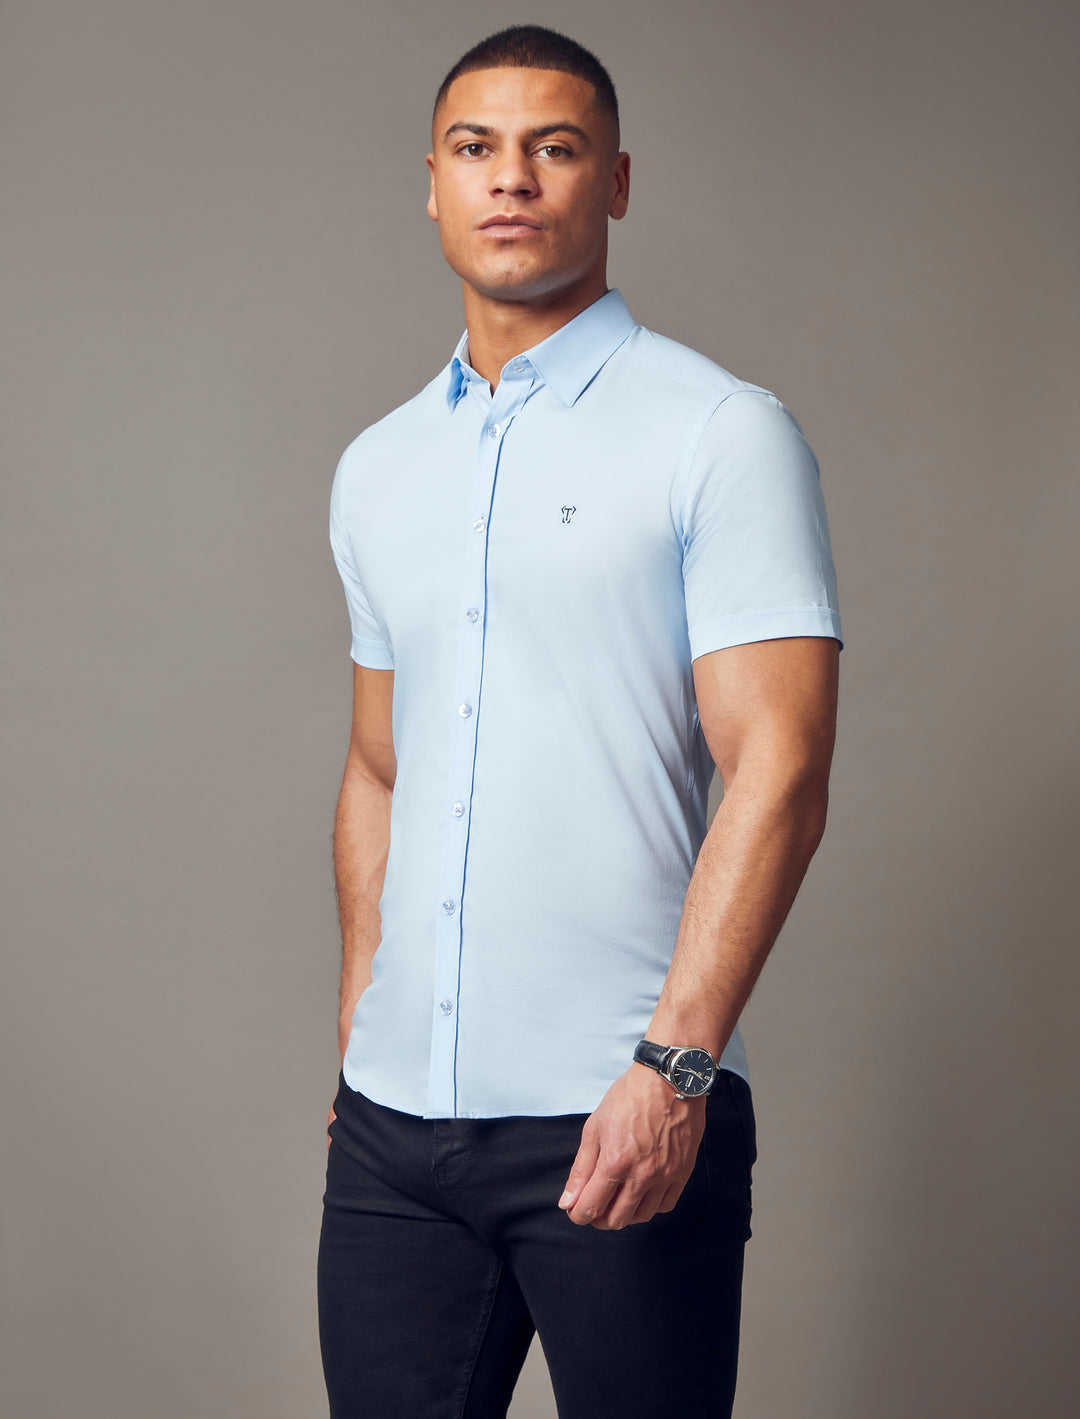 blue short sleeve tapered fit shirt by Tapered Menswear, showcasing the muscle fit design for a comfortable and tailored appearance